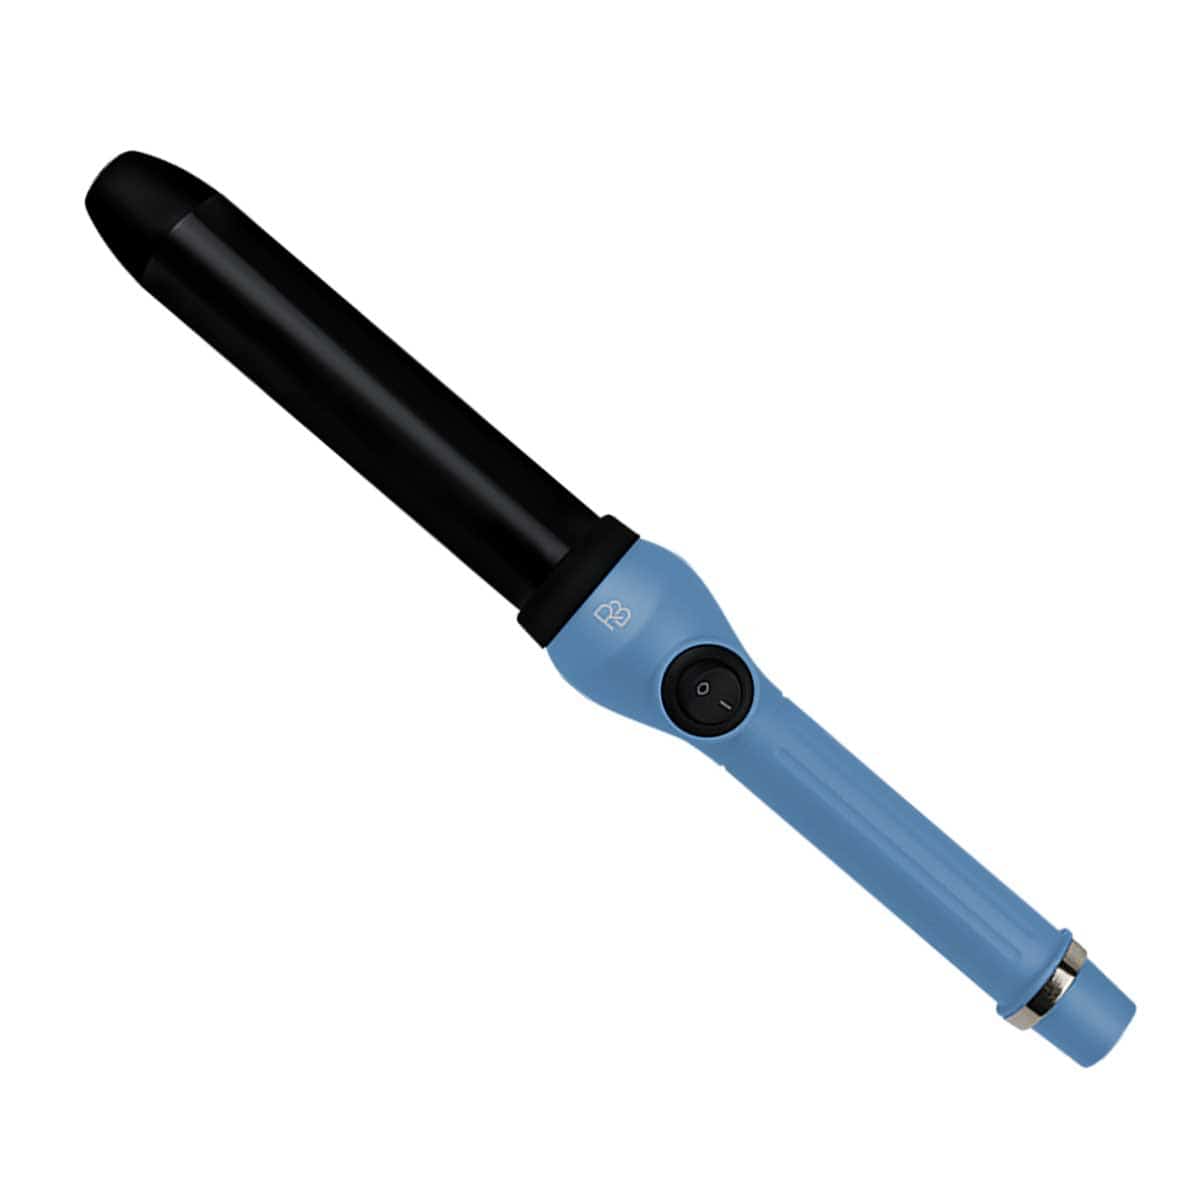 Viva Curl Pro Clipless Curling Wand